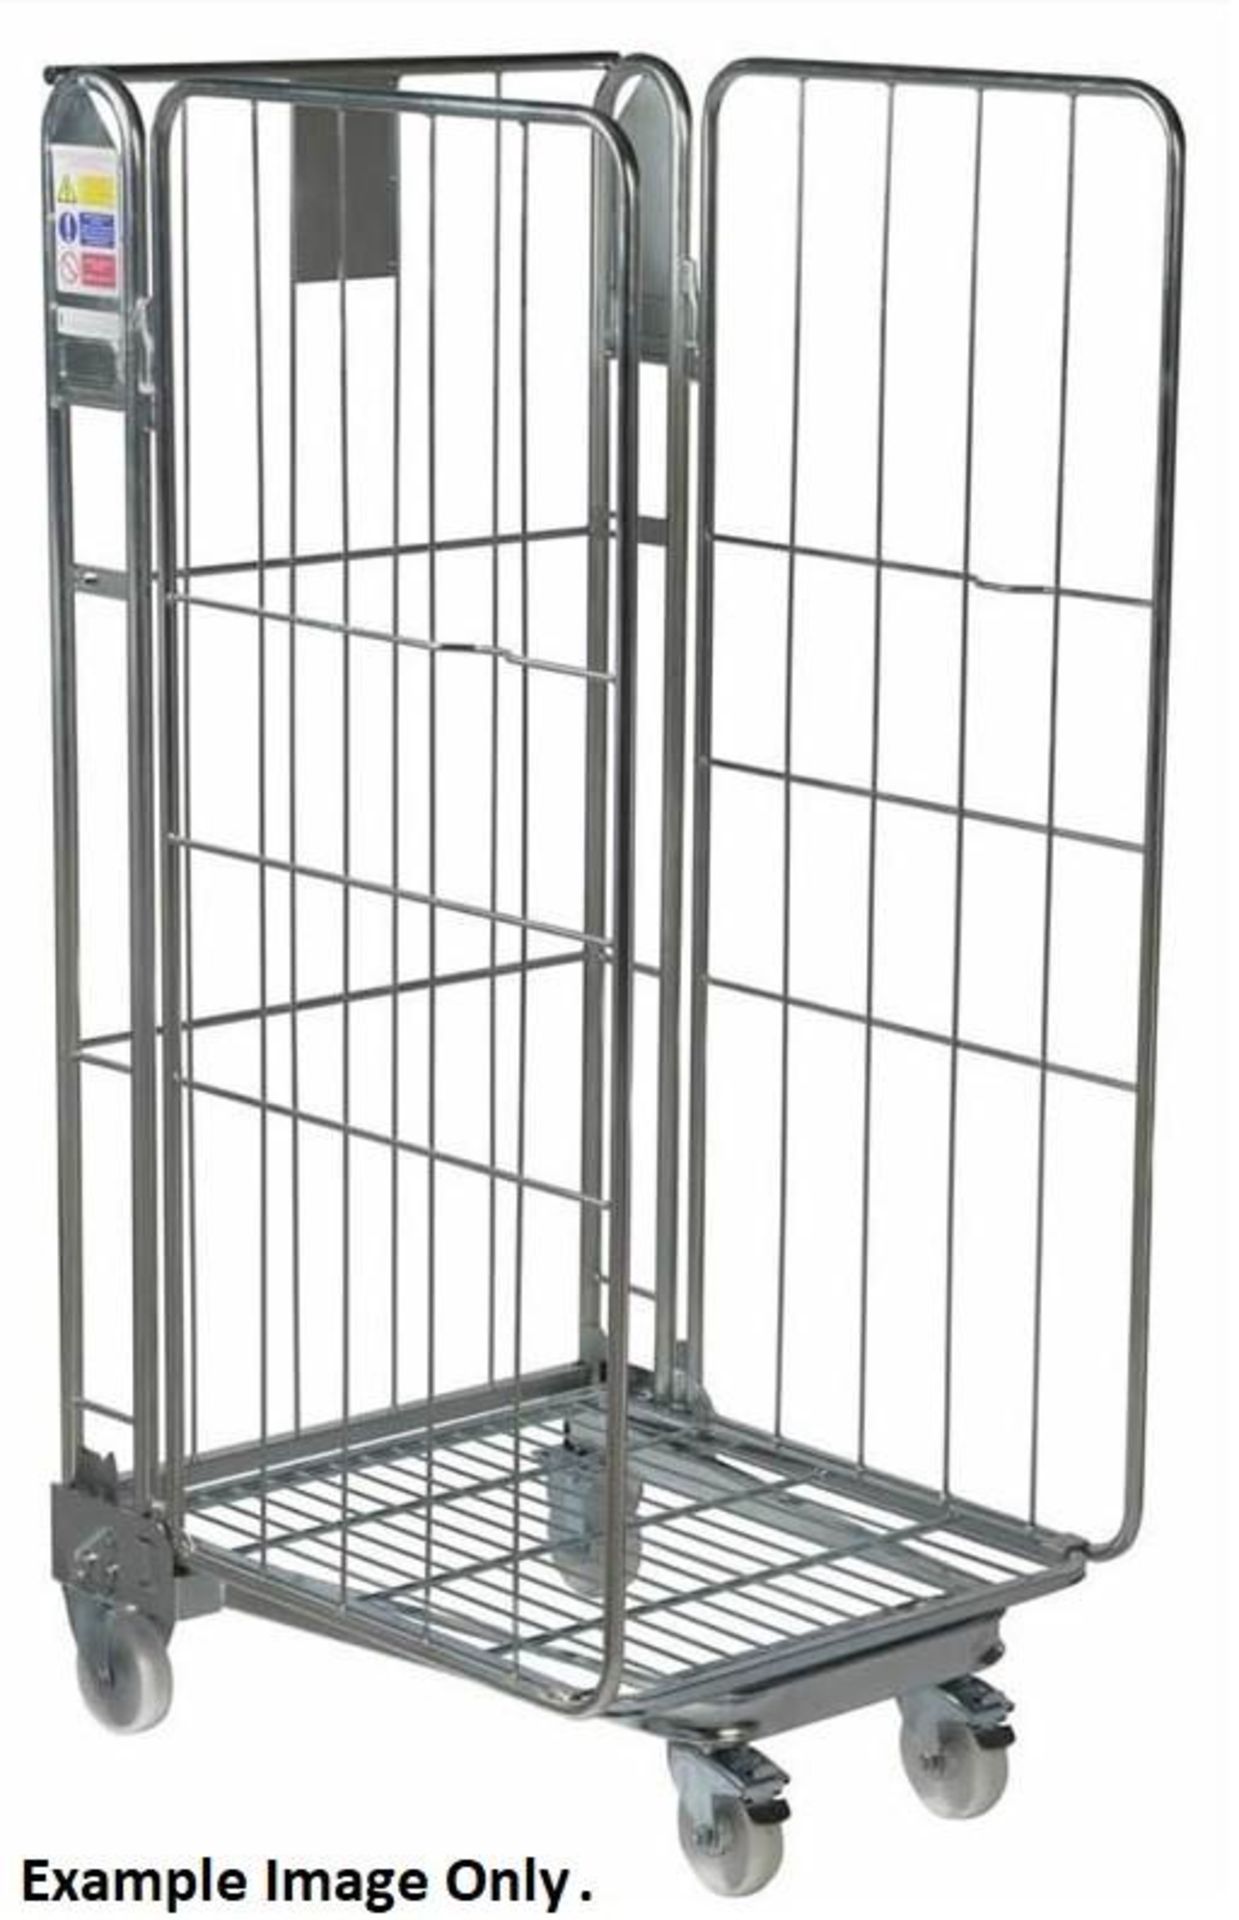 1 x Roller Cage With Heavy Duty Castors - Demountable With Three Sides - Ideal For Storing and Movin